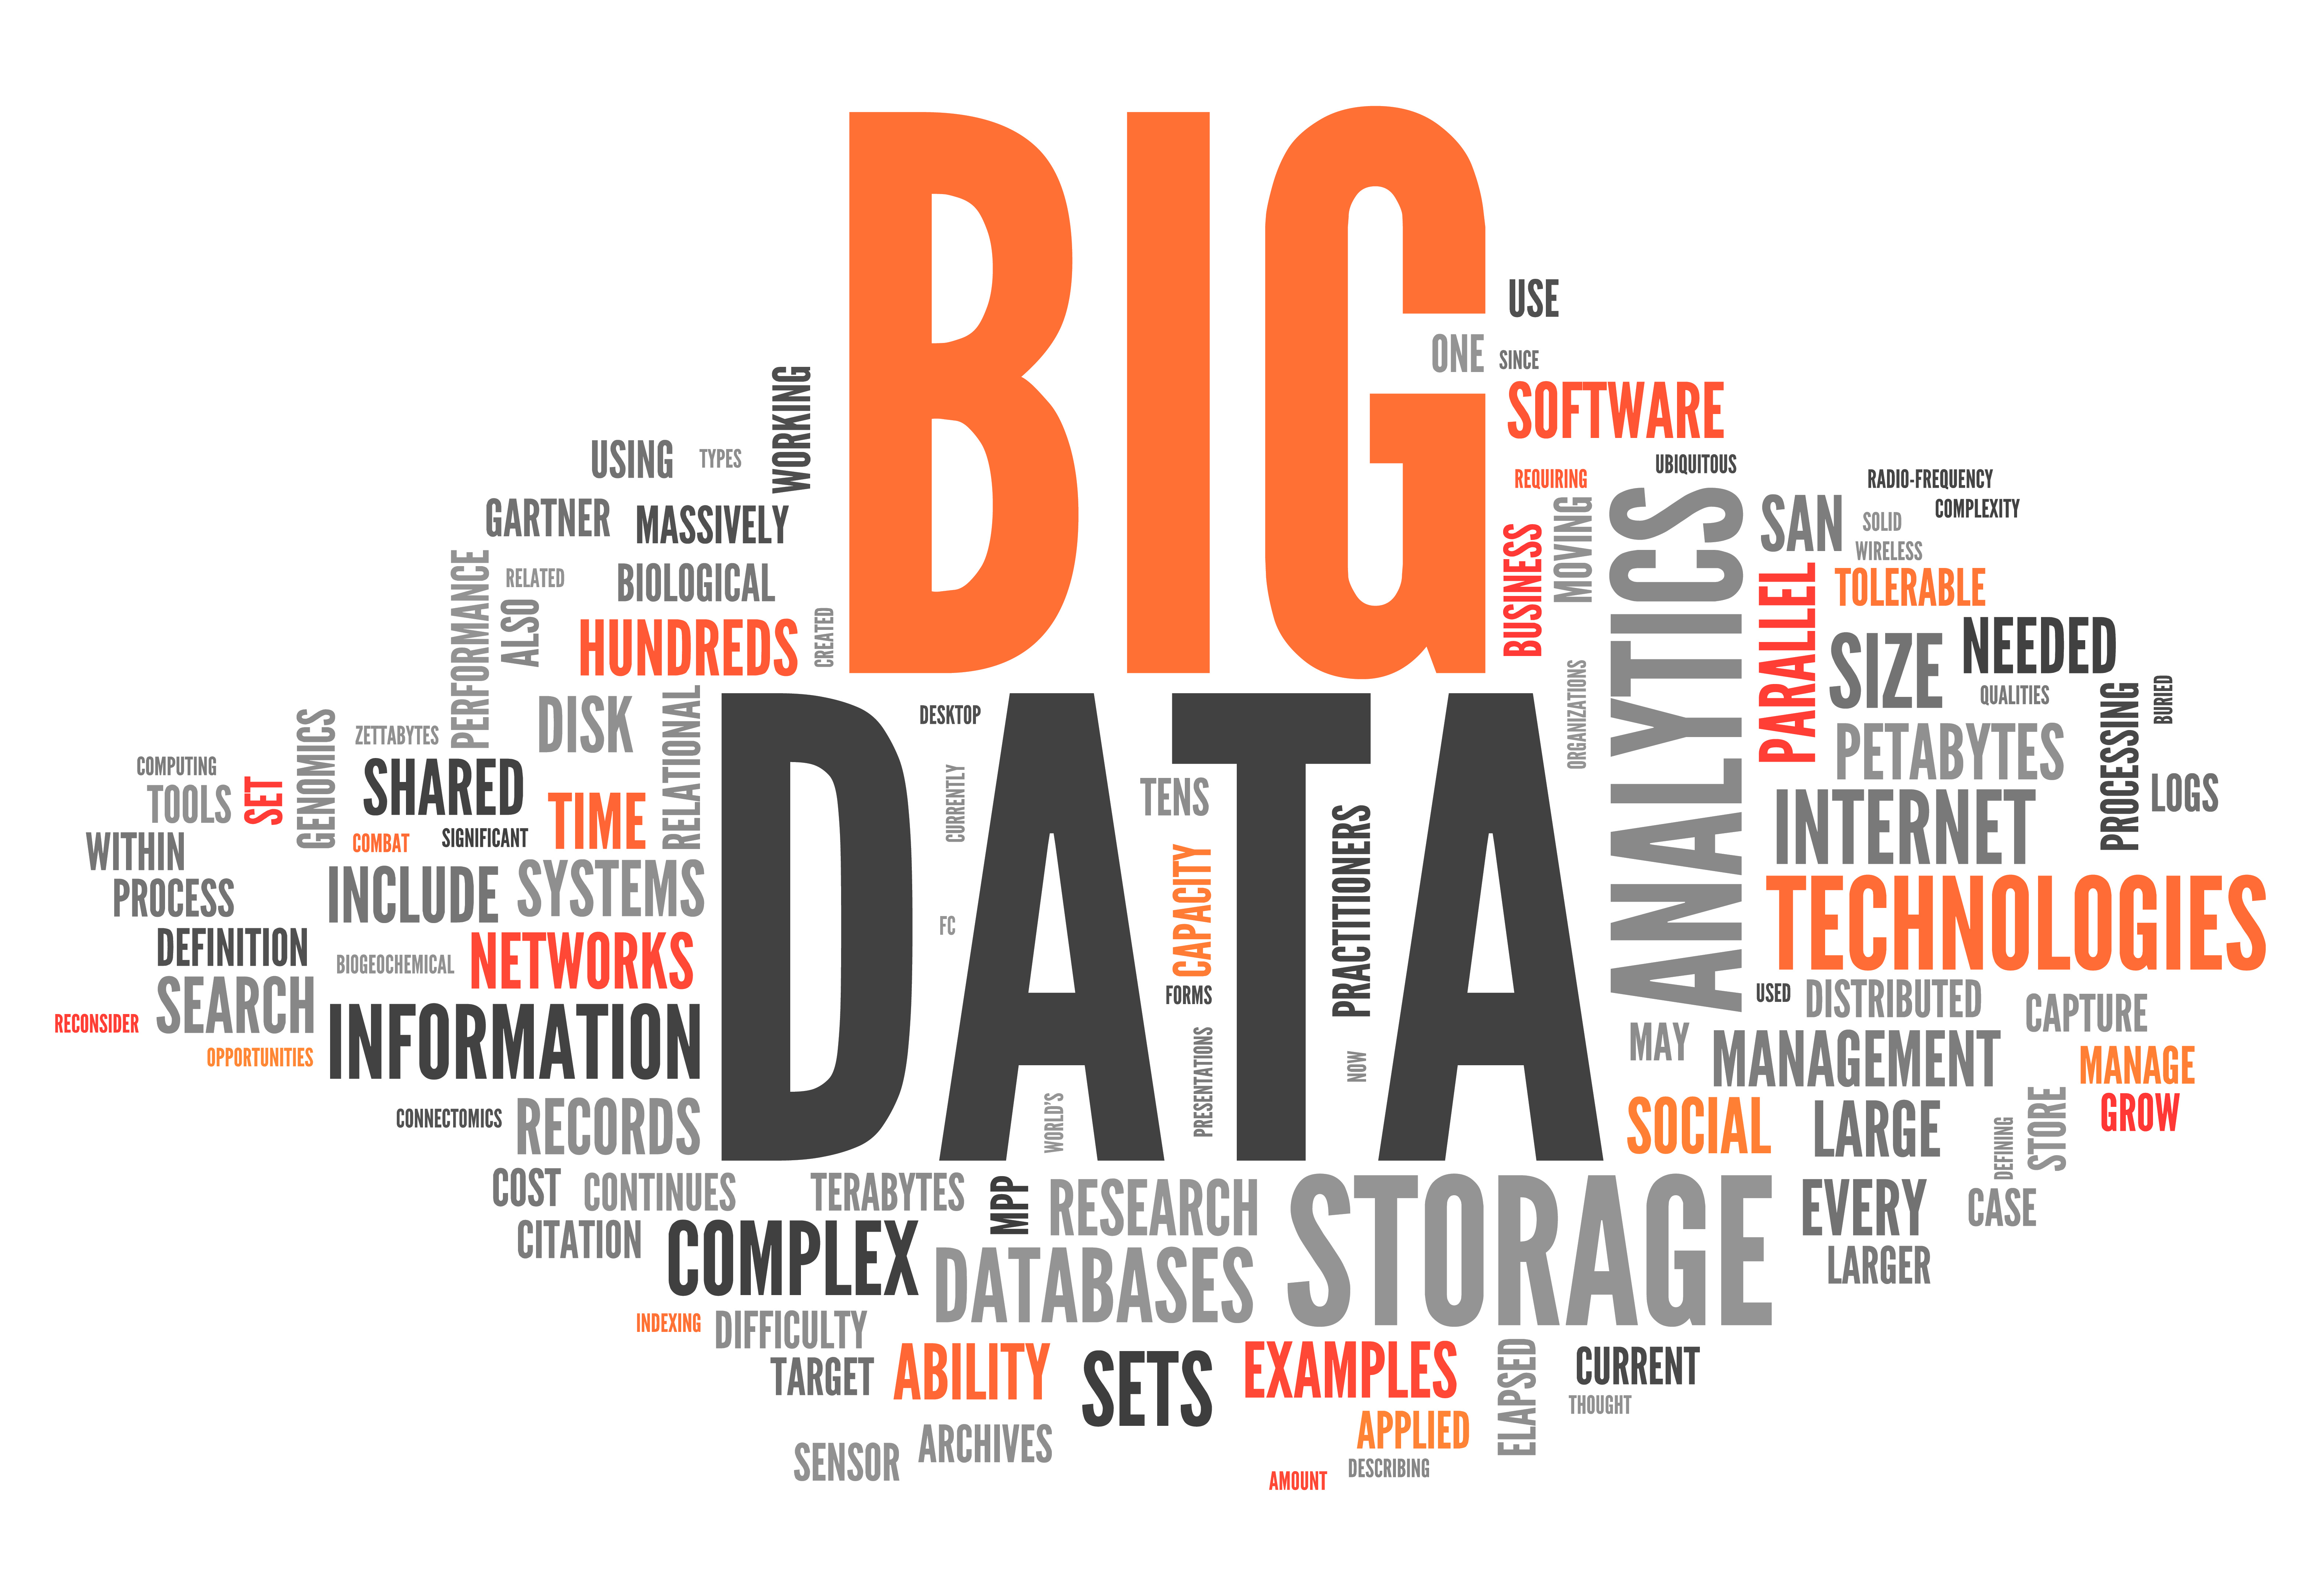 How Big Data Can Help Businesses Acquire, Grow and Retain Customers